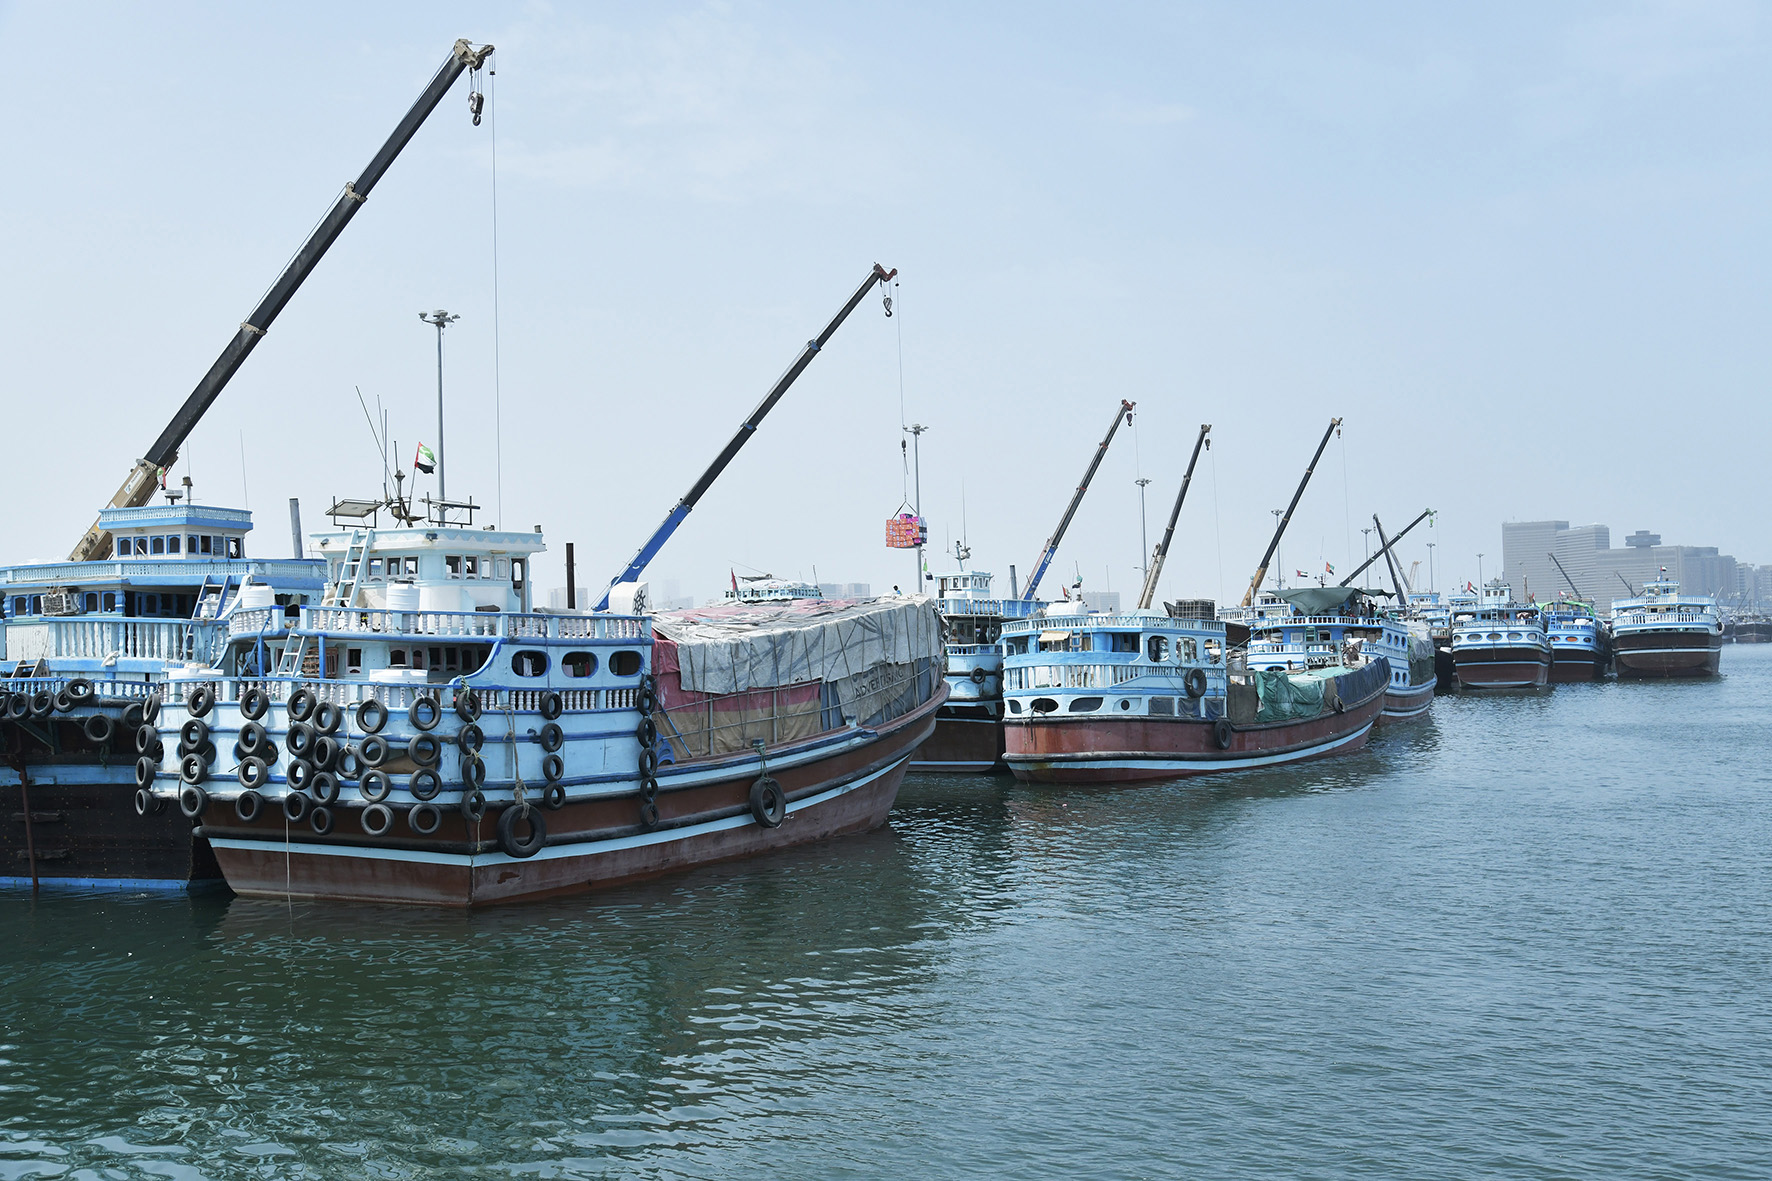 Dubai’s dhow trade sees robust growth with over 6,000 wooden boats entering its ports during the first half of 2022, reflecting 21% y-o-y growth